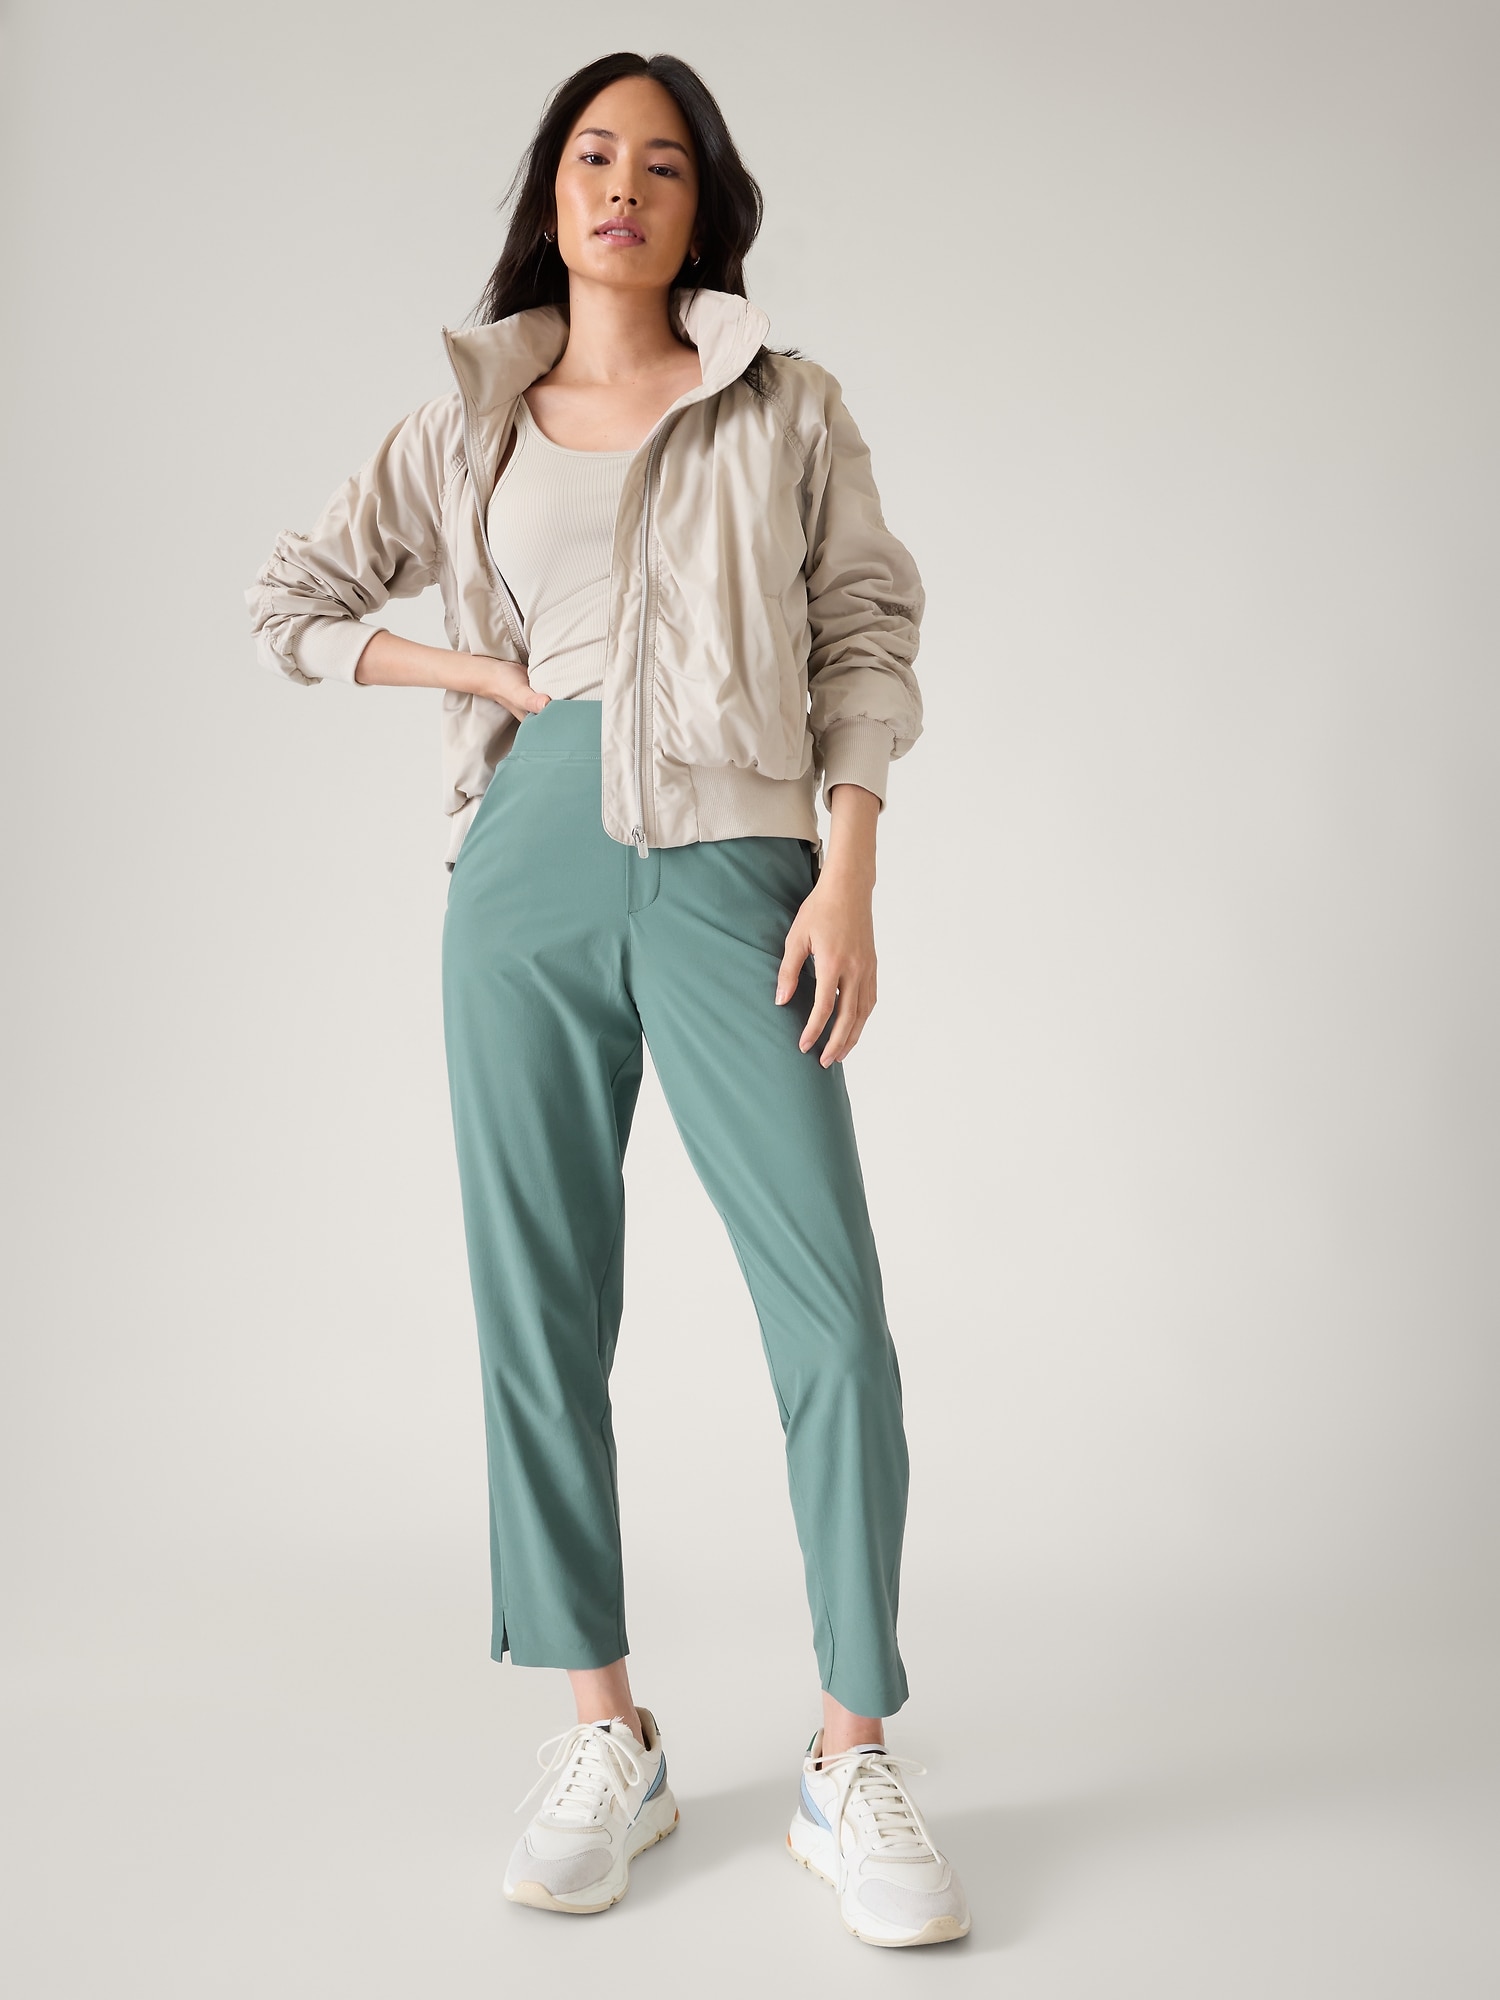 Brooklyn Ankle Pant, textile, Introducing the new Brooklyn Ankle Pant:  Recycled fabric that's lightweight, wrinkle resistant, easy to move in, and  UPF 50+. Shop now: gap.us/2nyLmCk